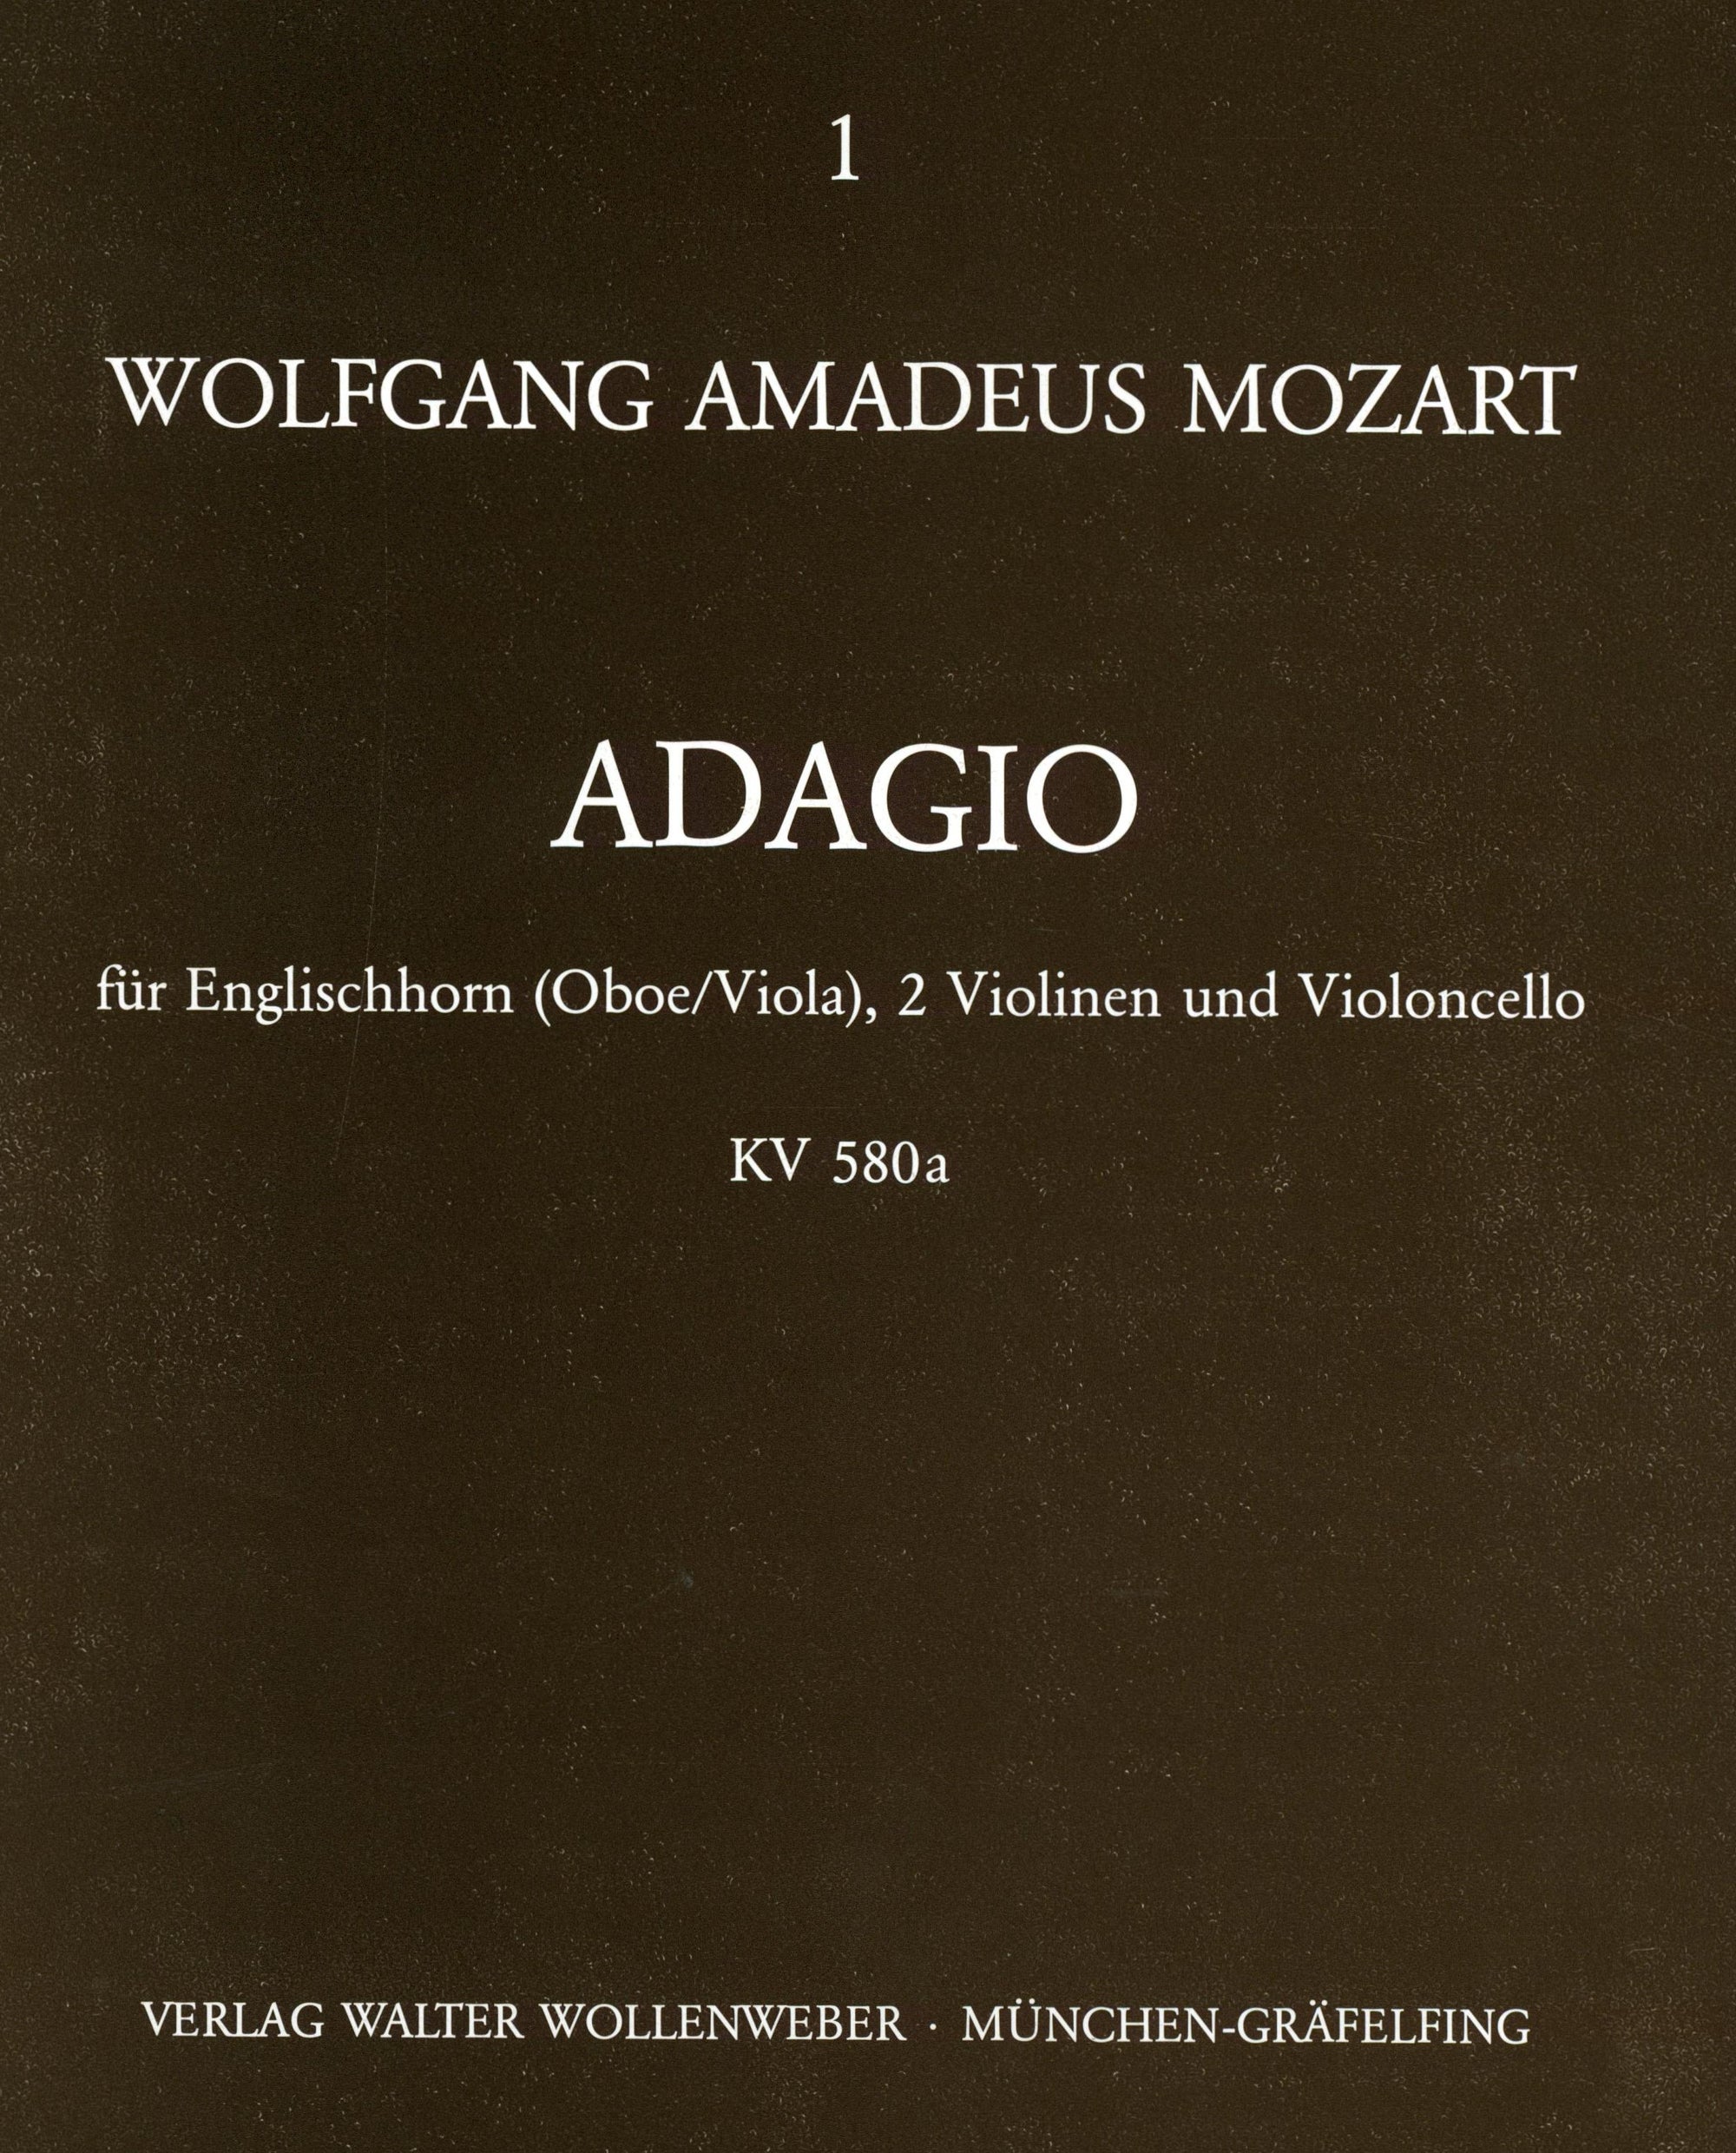 Mozart: Adagio, K. Anh. 94 (580a) - arr. for english horn, 2 violins & cello